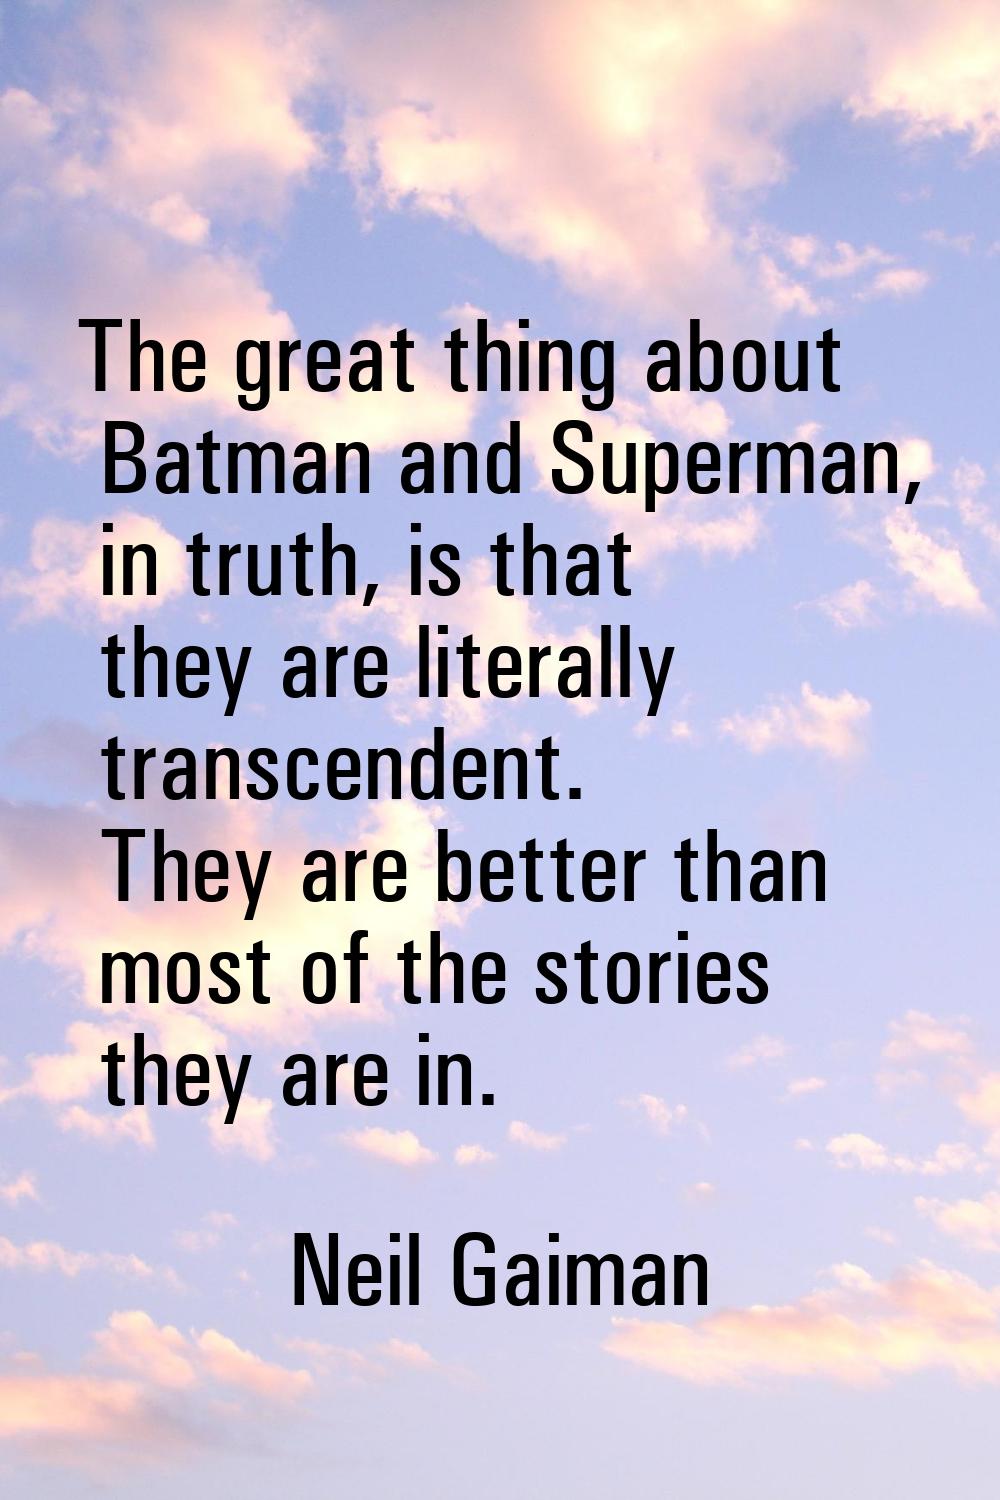 The great thing about Batman and Superman, in truth, is that they are literally transcendent. They 